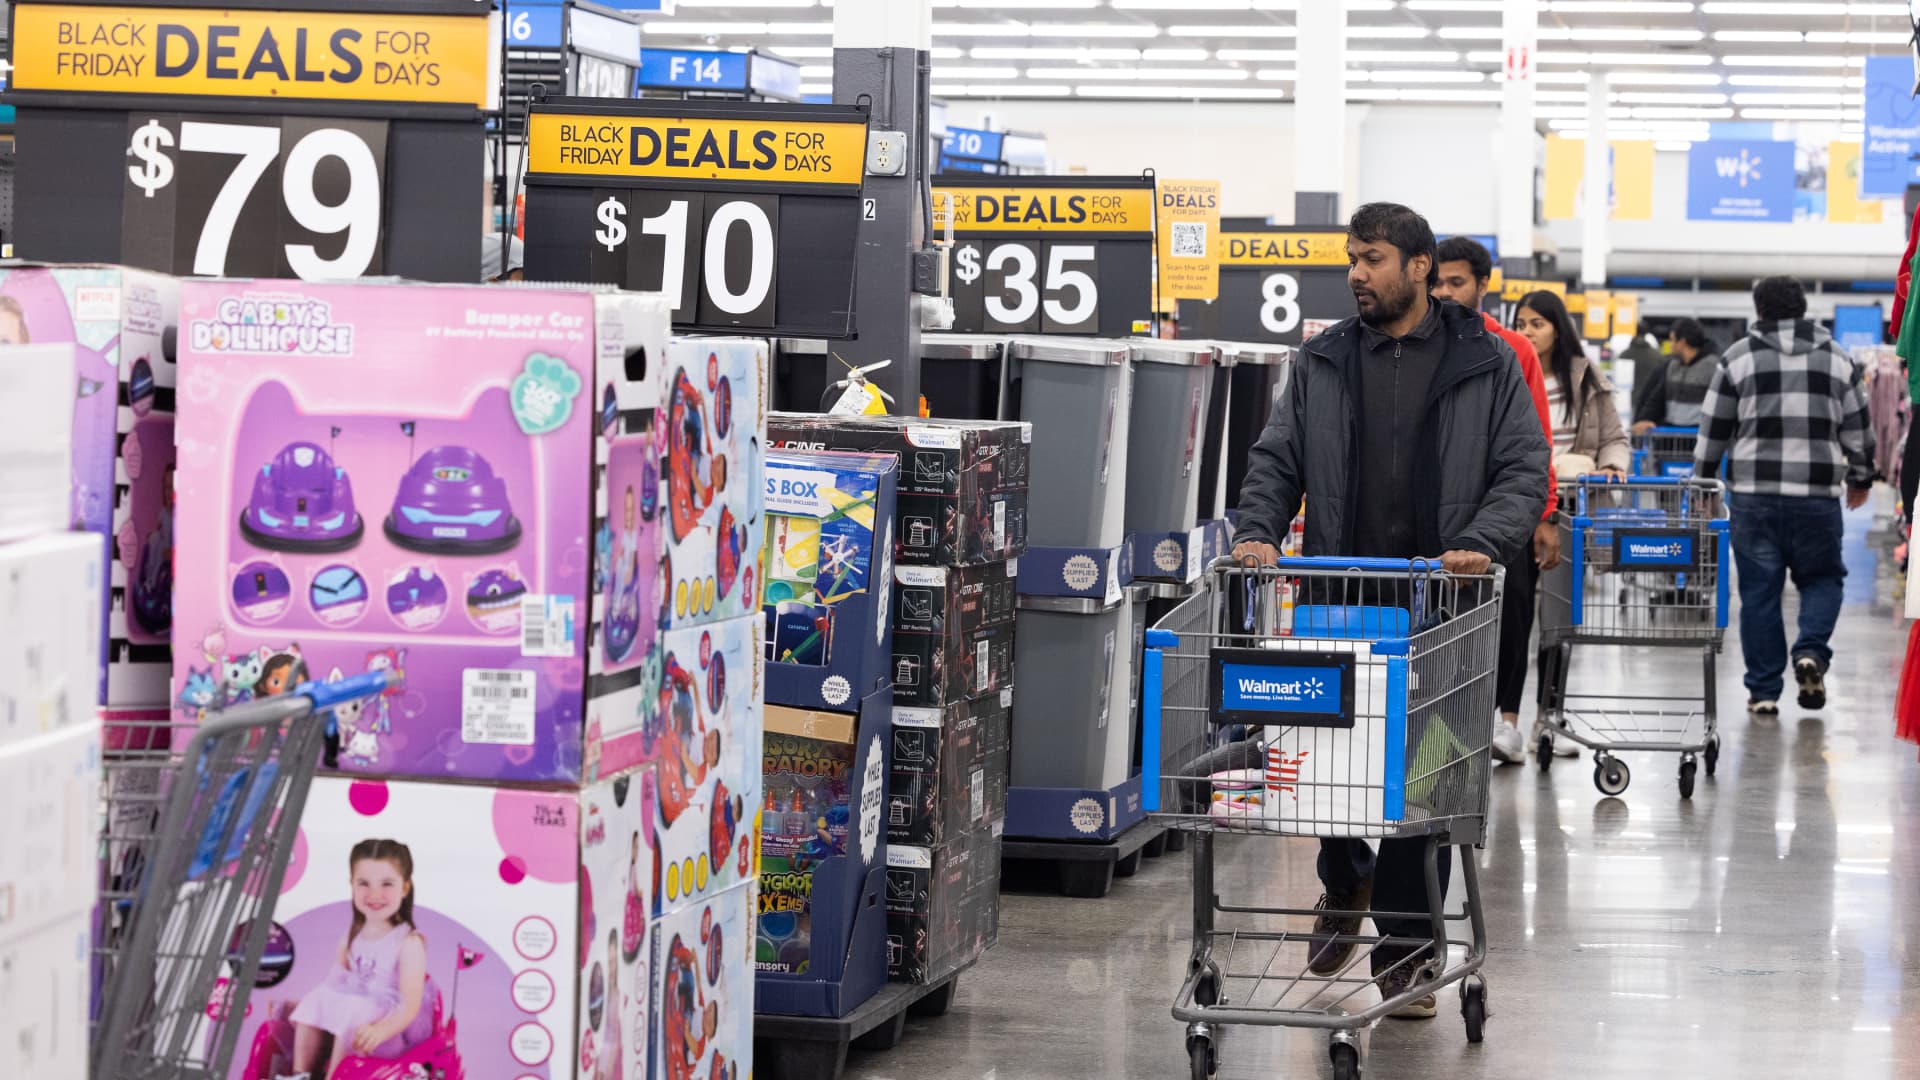 Walmart overtakes Amazon in shoppers' search for bargains